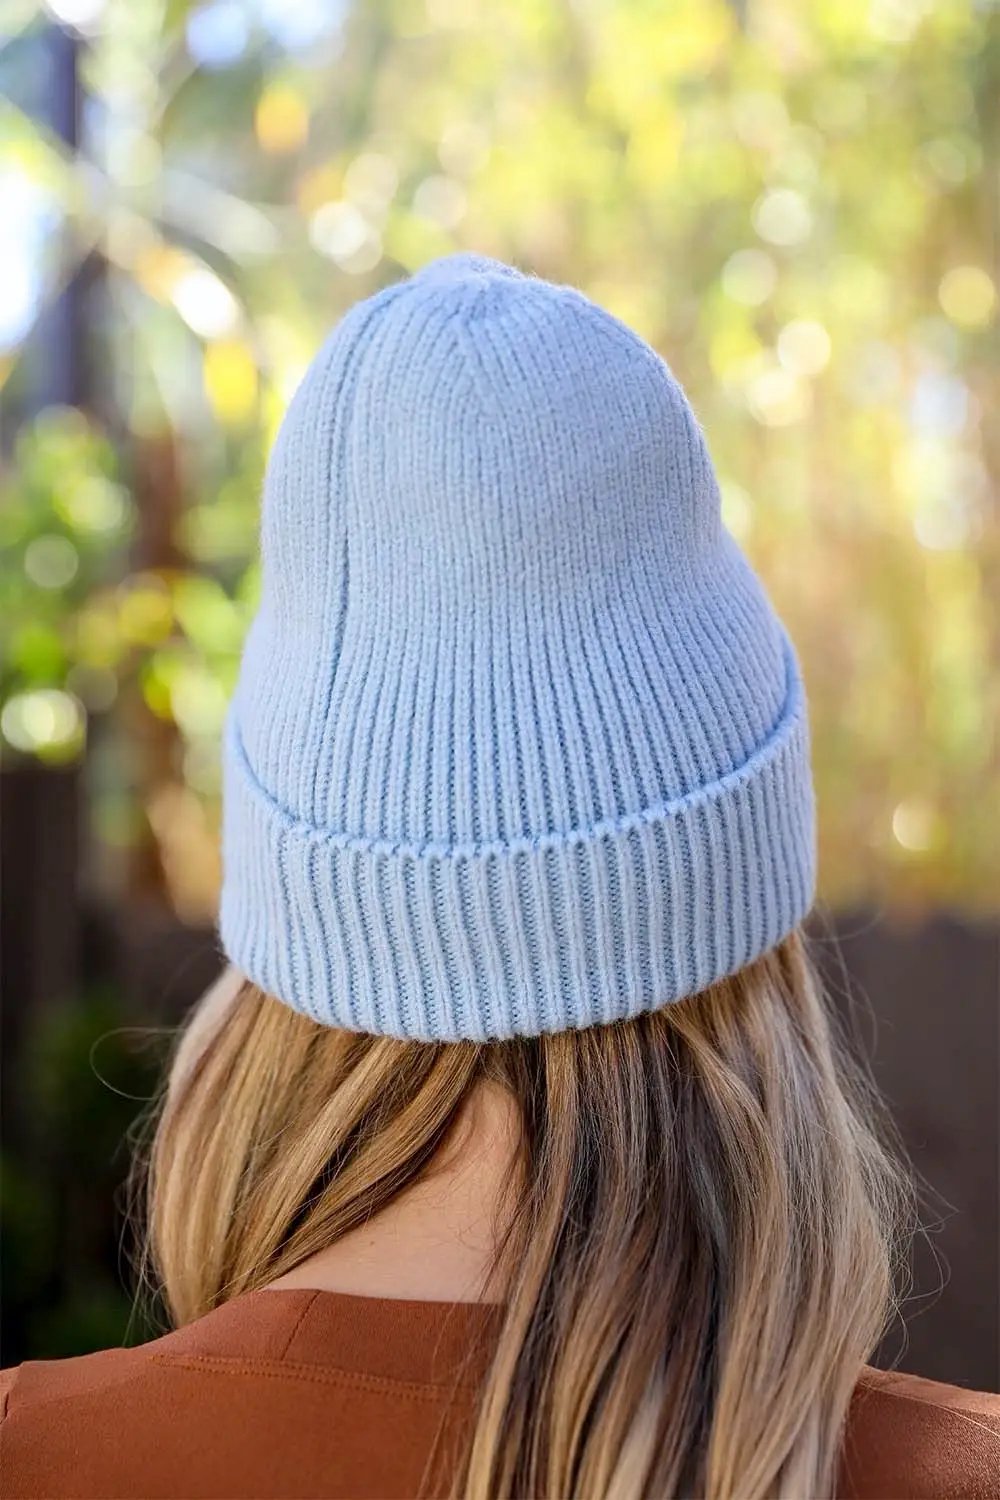 Smiley Face Ribbed Beanie - Blue - Hats